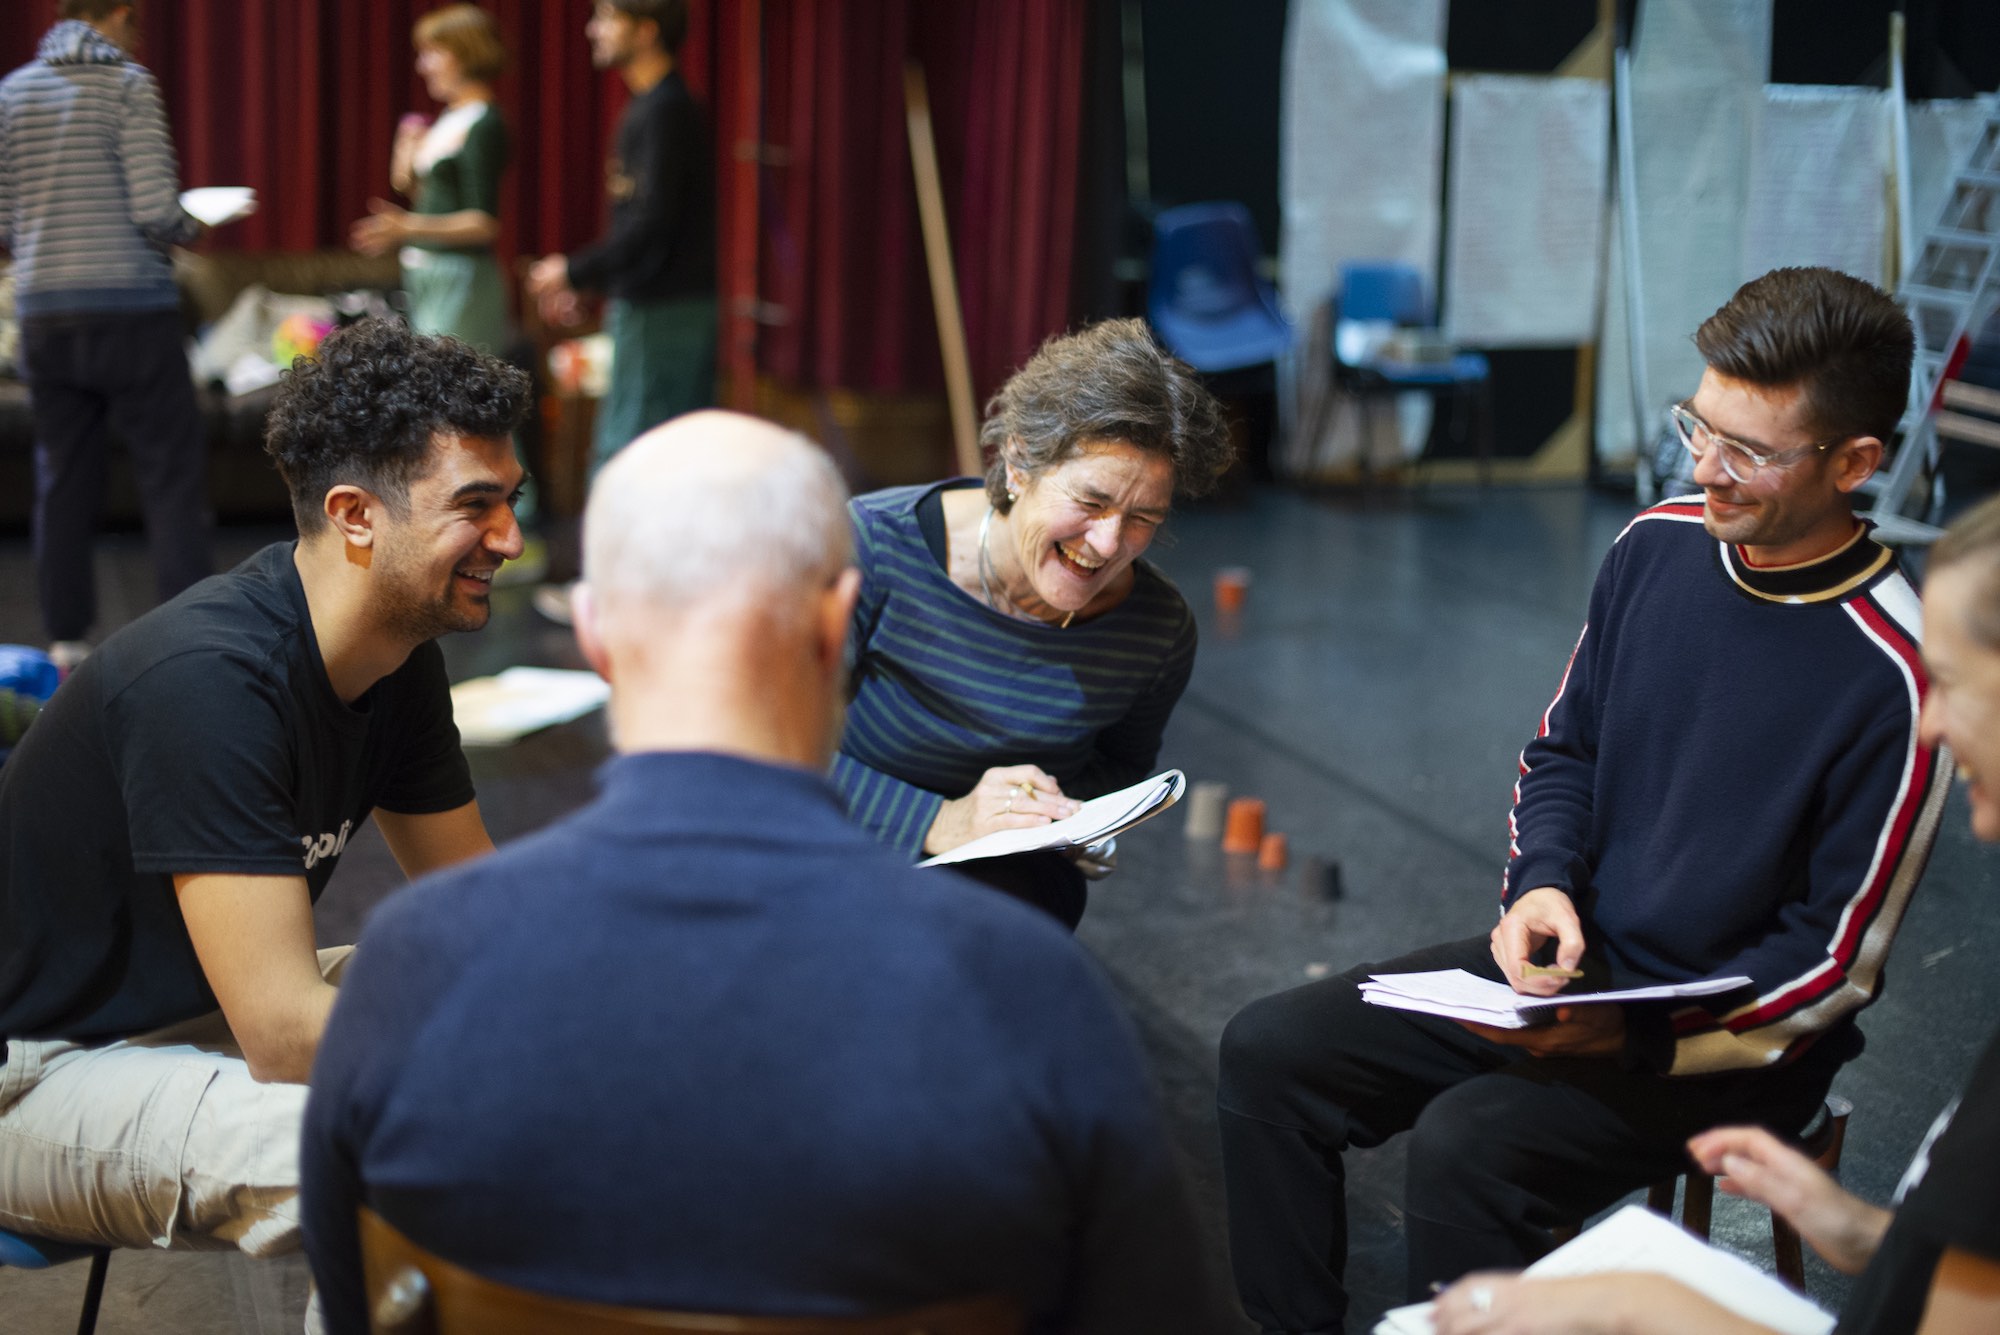 The actors sit in a circle and laugh together as they discuss ideas and write them in their notebooks